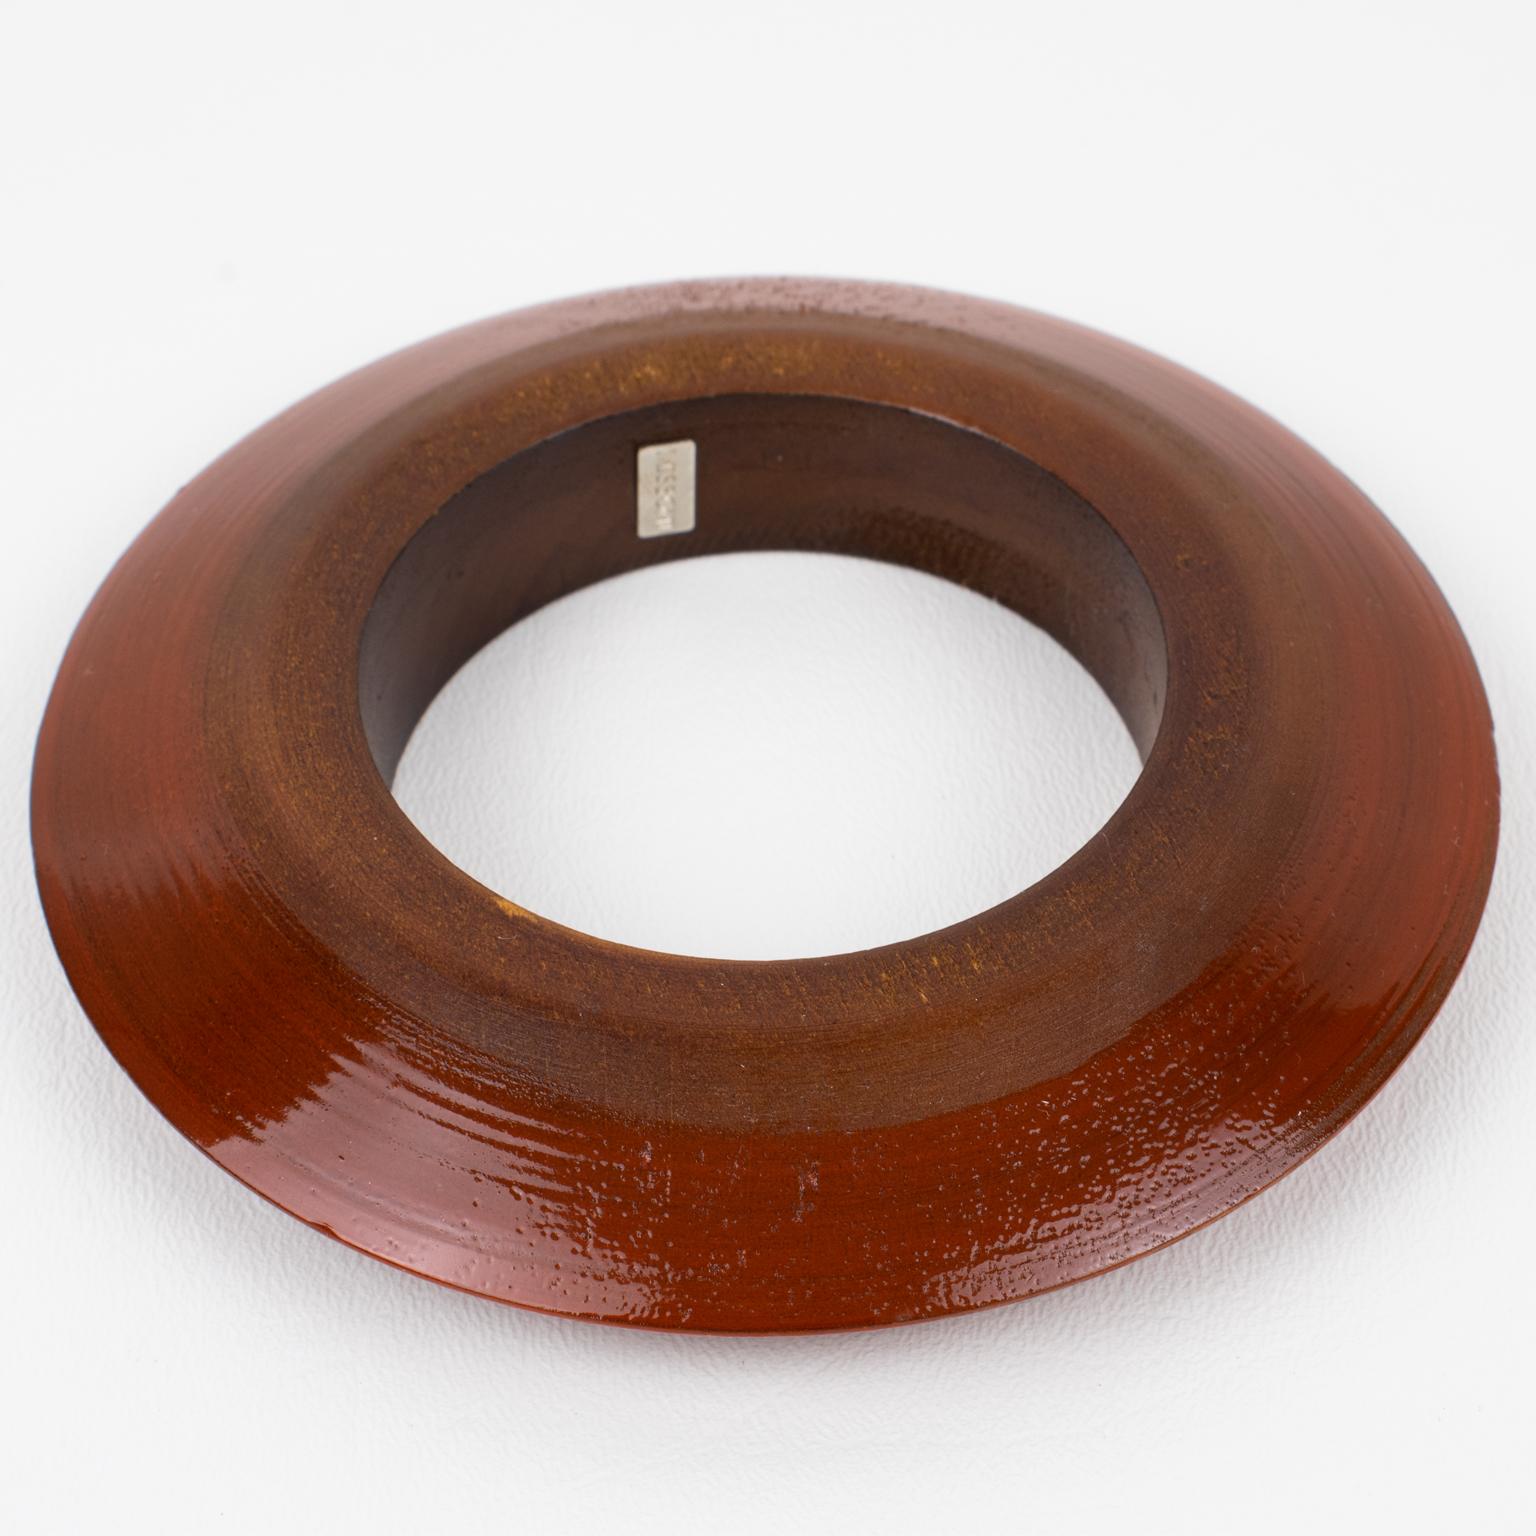 A stunning Missoni, Italy, ethnic-inspired wooden bracelet. A massive flying saucer shape bracelet made of tropical wood with maroon enamel paint application. 
The marking is inside the bracelet with a small metal brand logo indicating